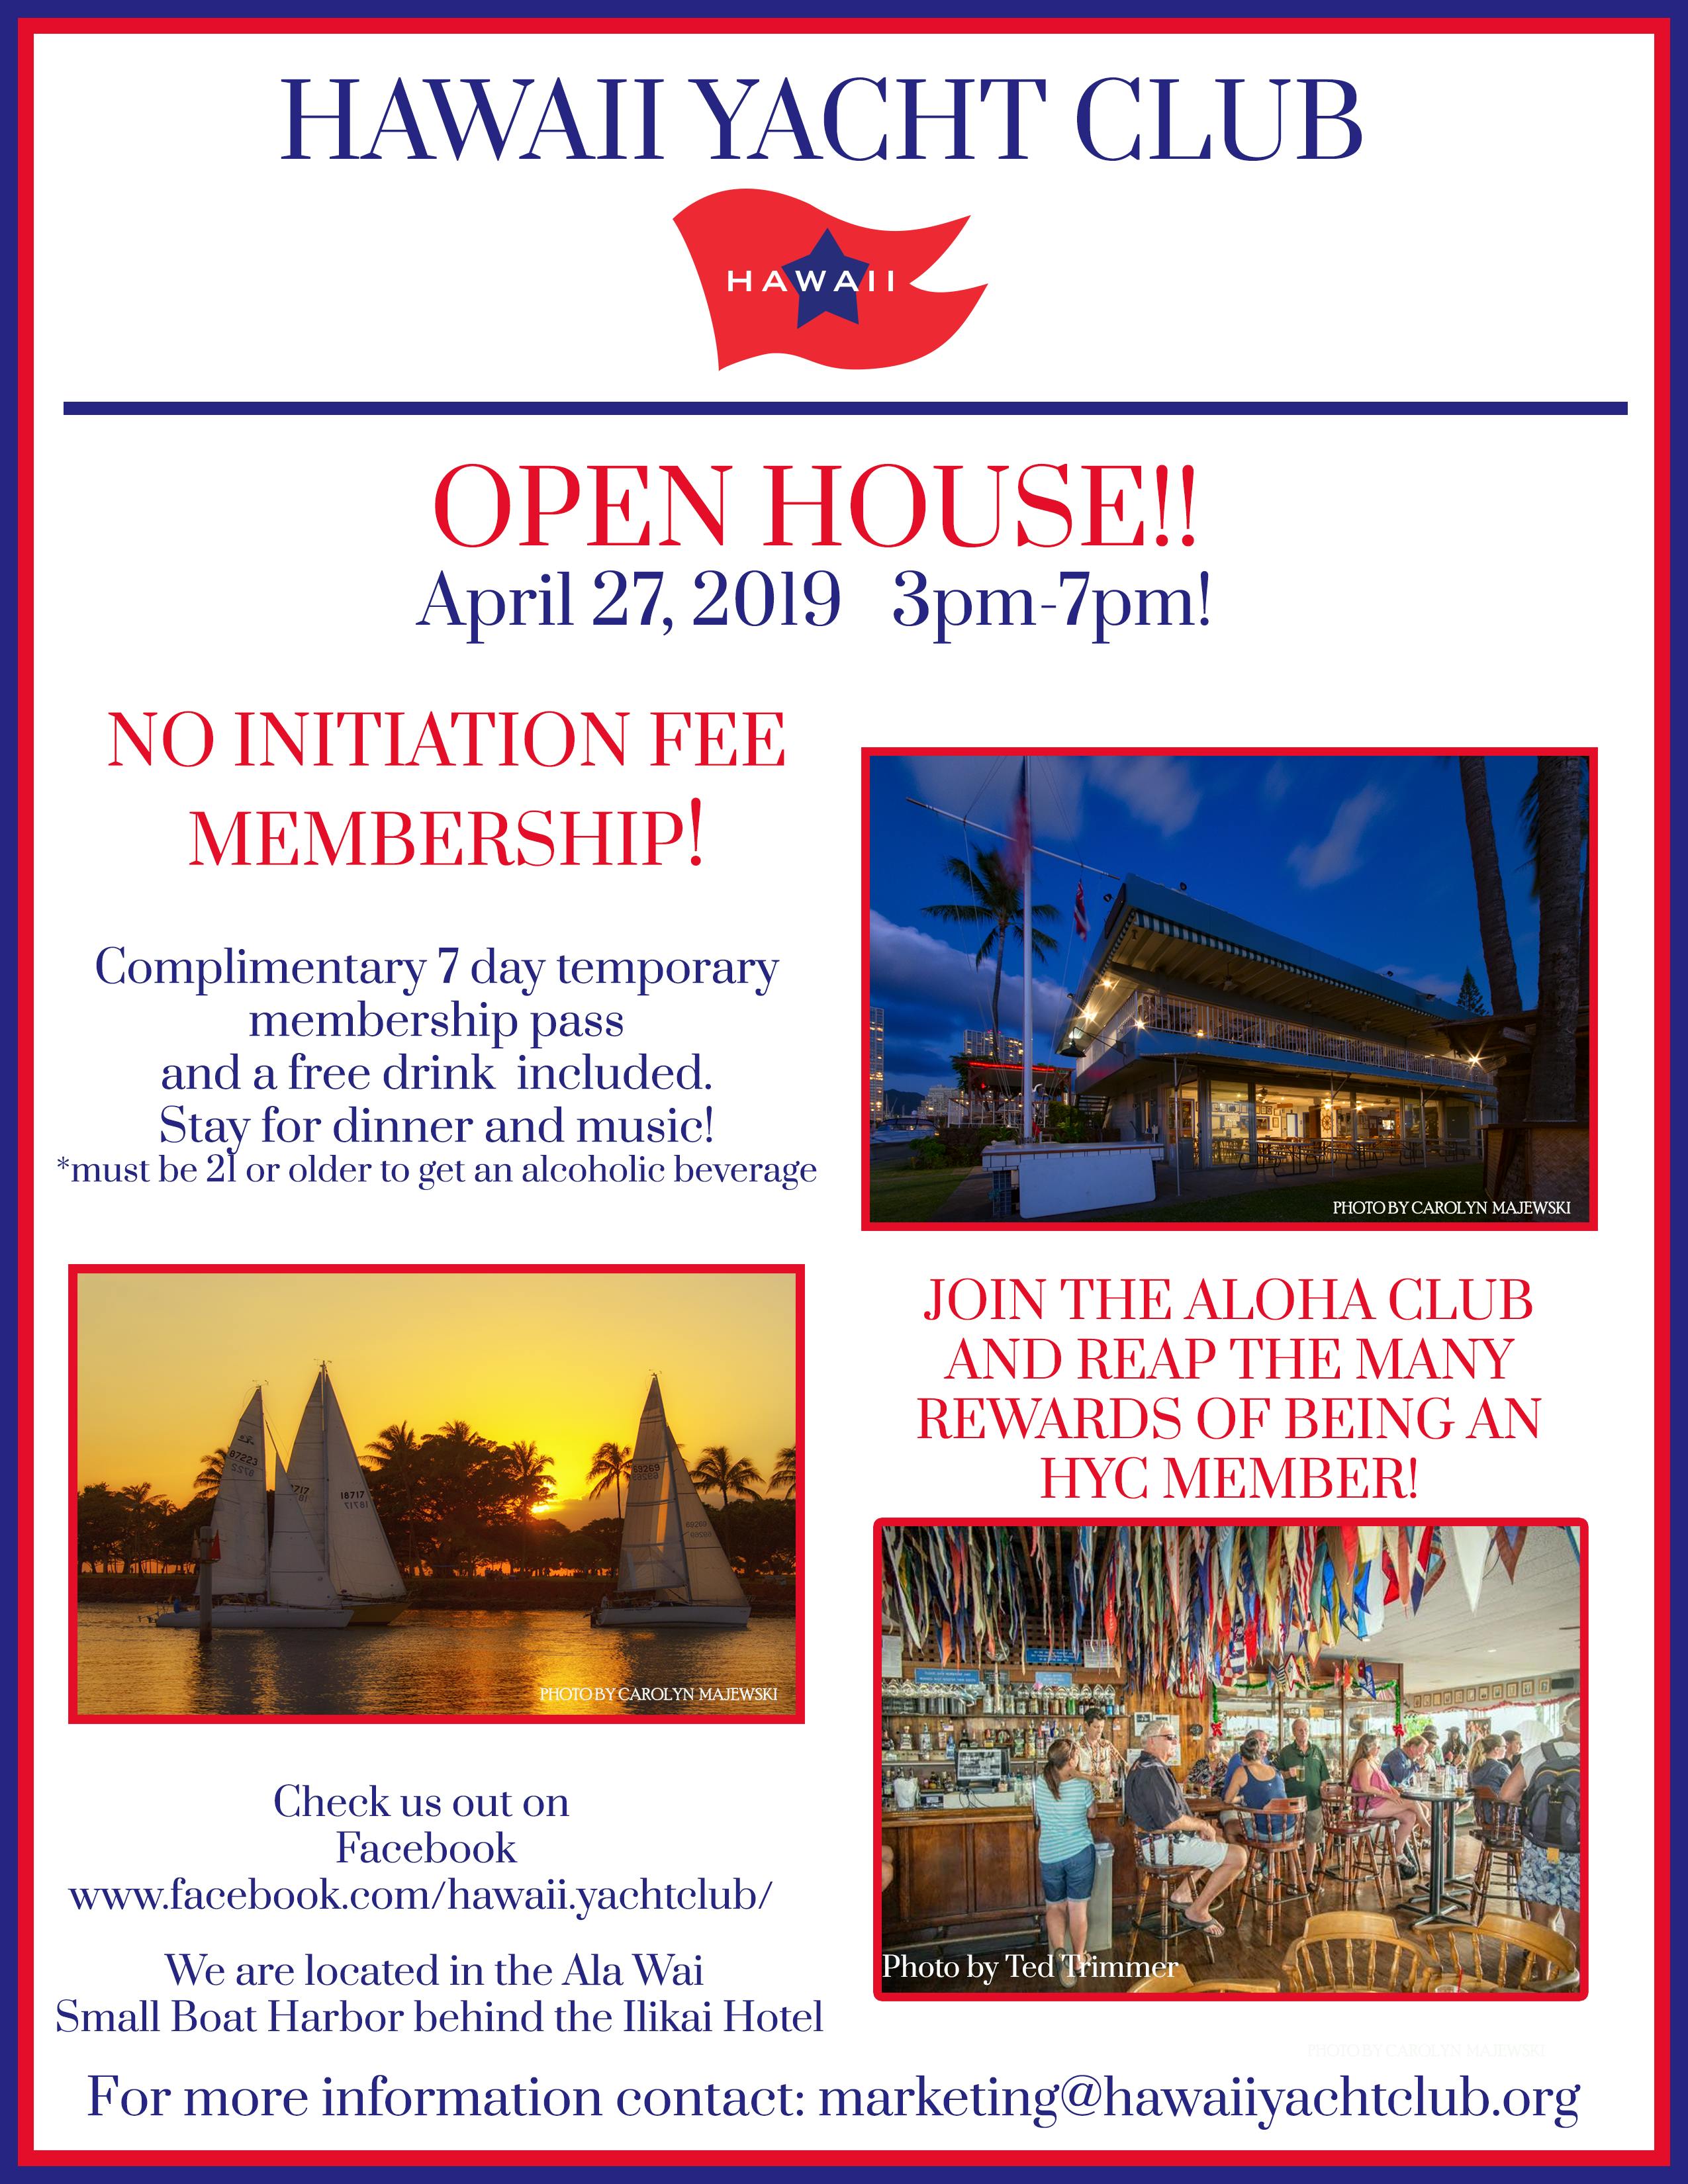 OPEN HOUSE AT HAWAII YACHT CLUB